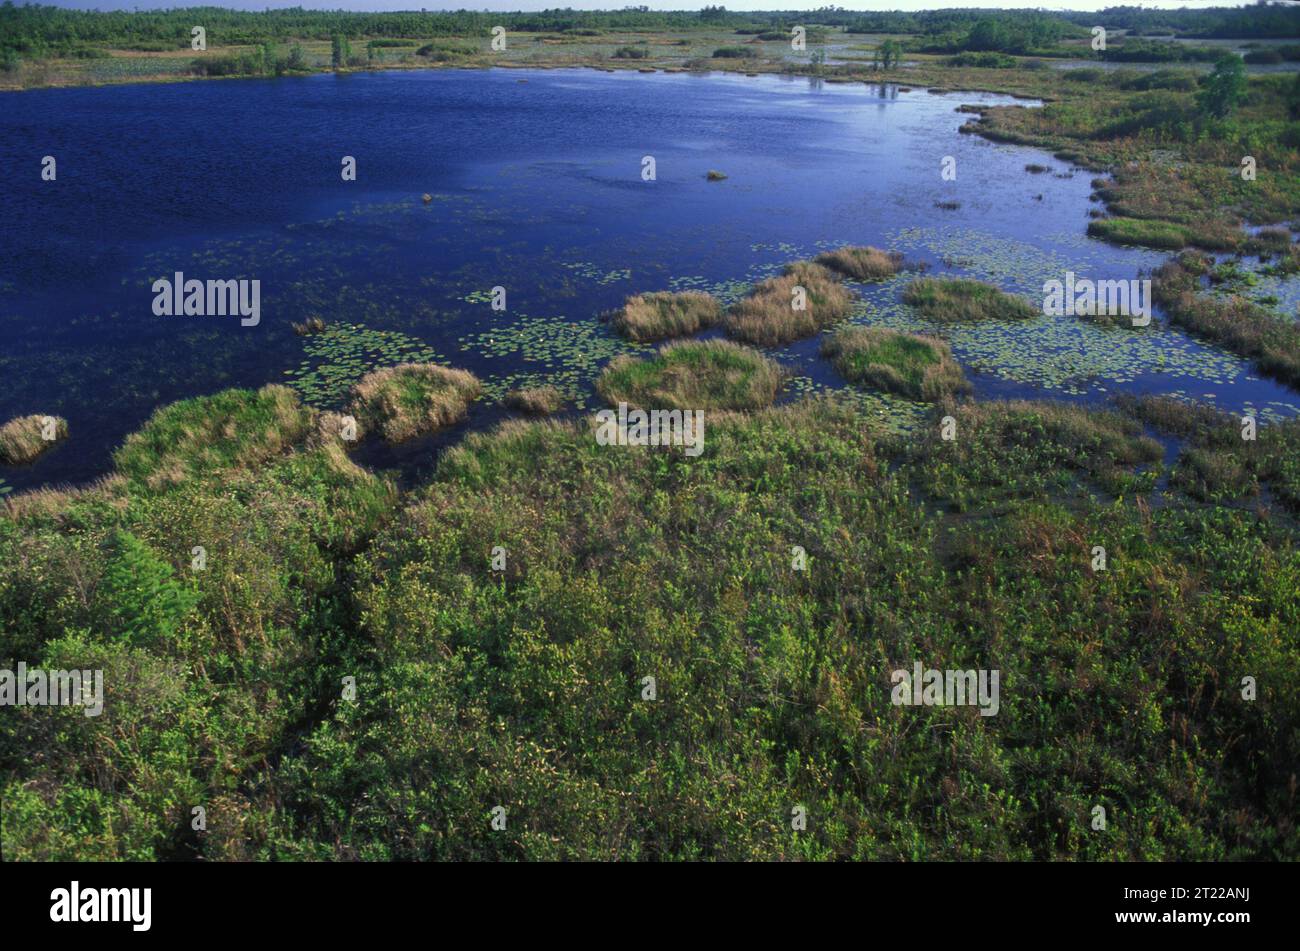 Aerial view of wetlands in Okefenokee Wildlife Refuge. Subjects: Aerial photography; Wetlands; Aquatic environments; Aquatic plants; Wildlife refuges. Location: Georgia. Fish and Wildlife Service Site: OKEFENOKEE NATIONAL WILDLIFE REFUGE.  . 1998 - 2011. Stock Photo